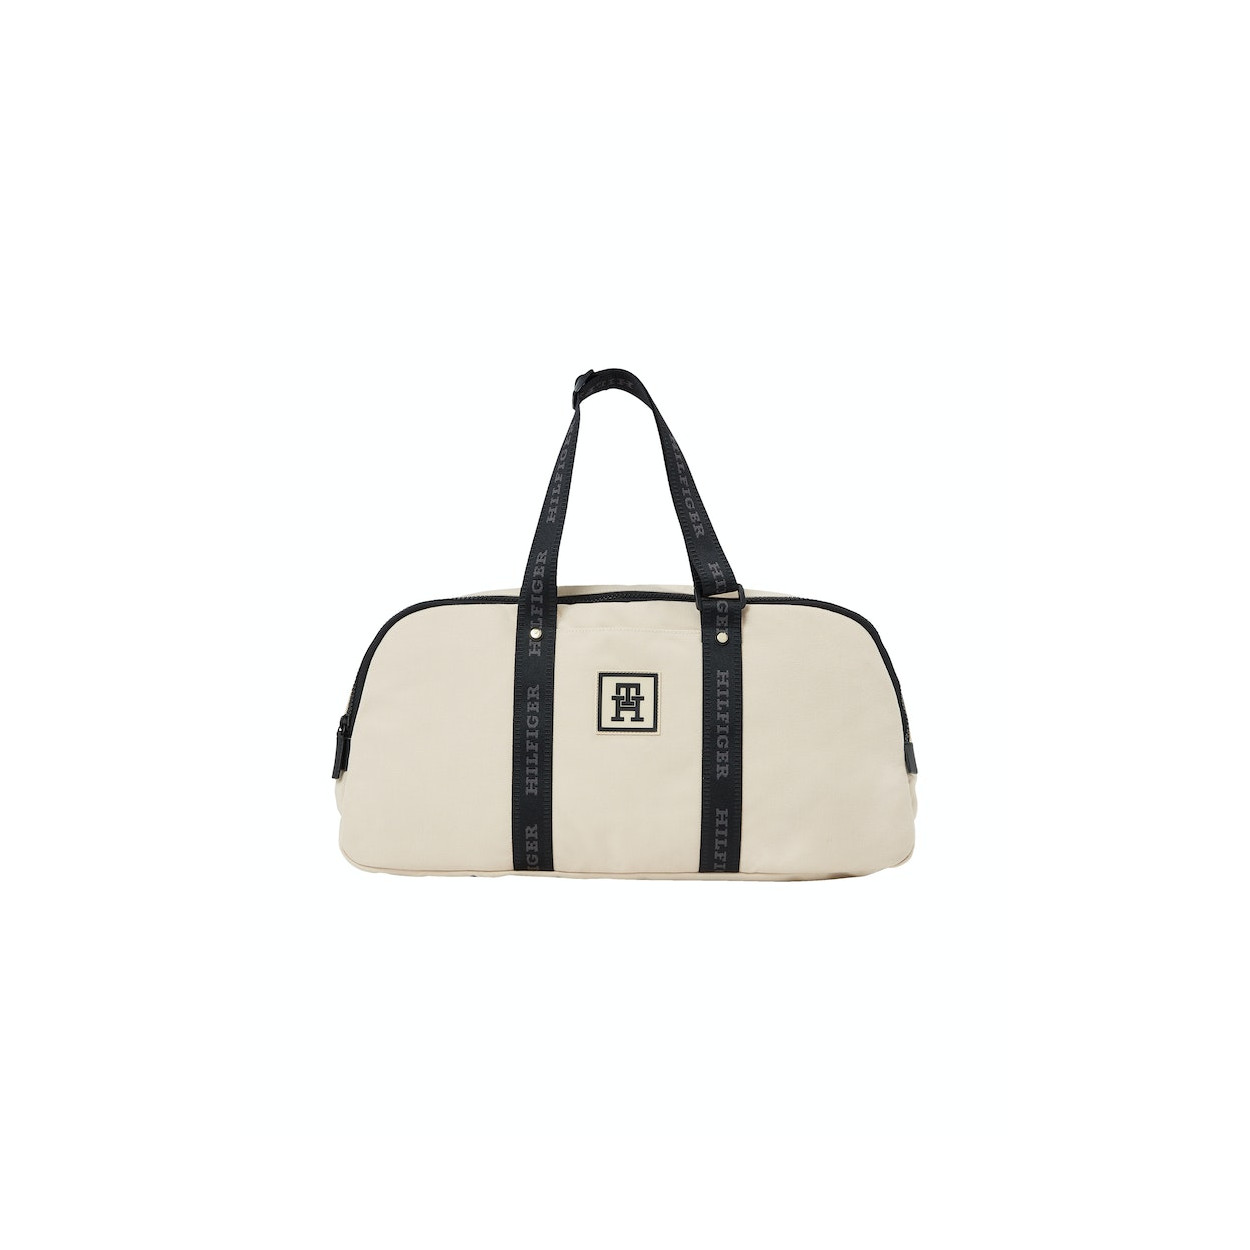 https://www.cloane-square.com/27515-large_default/sac-de-sport-tommy-hilfiger-femme-luxe-duffle-creme-AW0AW15729-AES.jpg